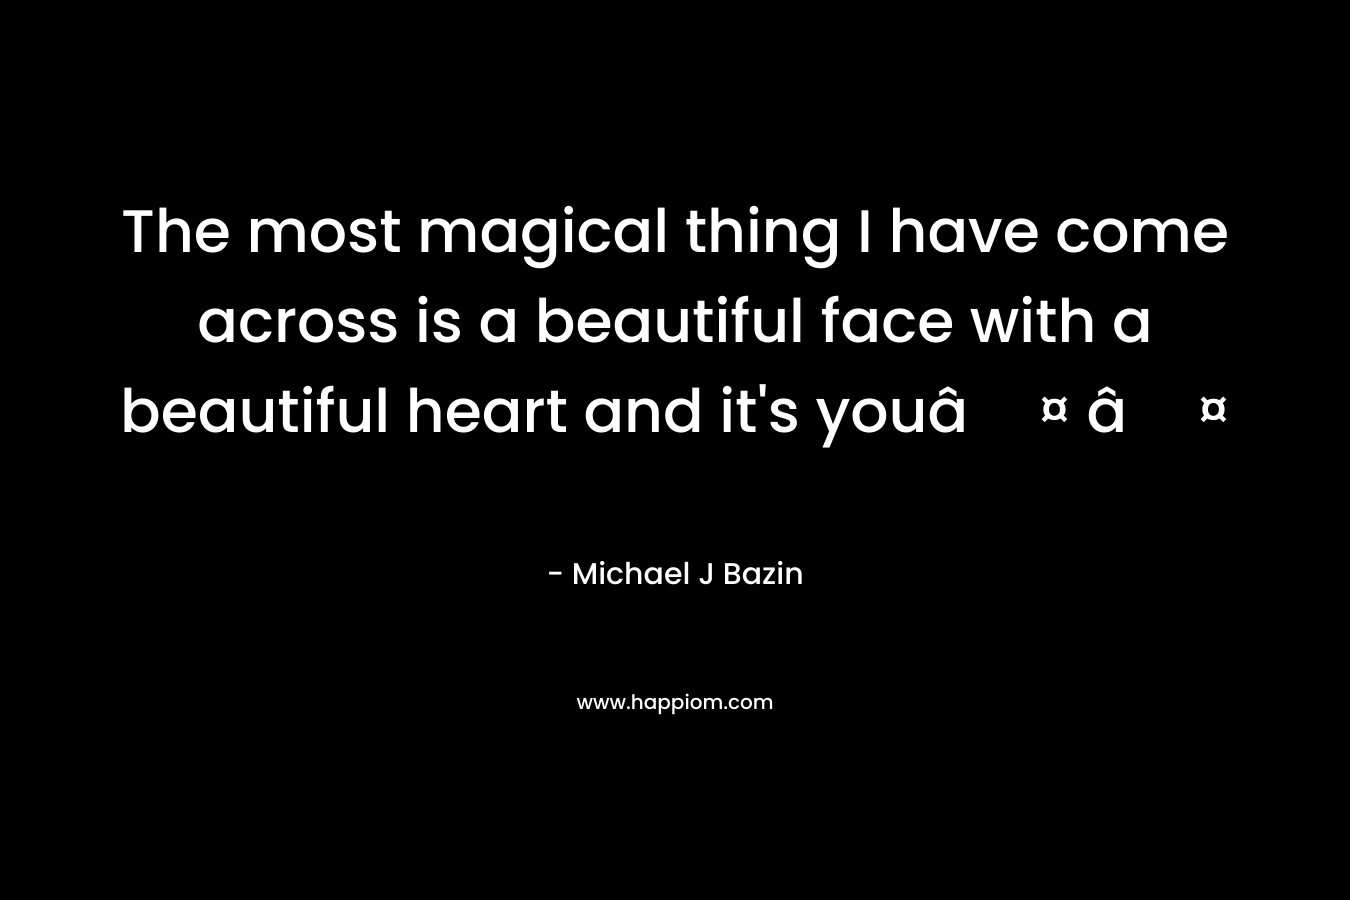 The most magical thing I have come across is a beautiful face with a beautiful heart and it's youâ¤ â¤